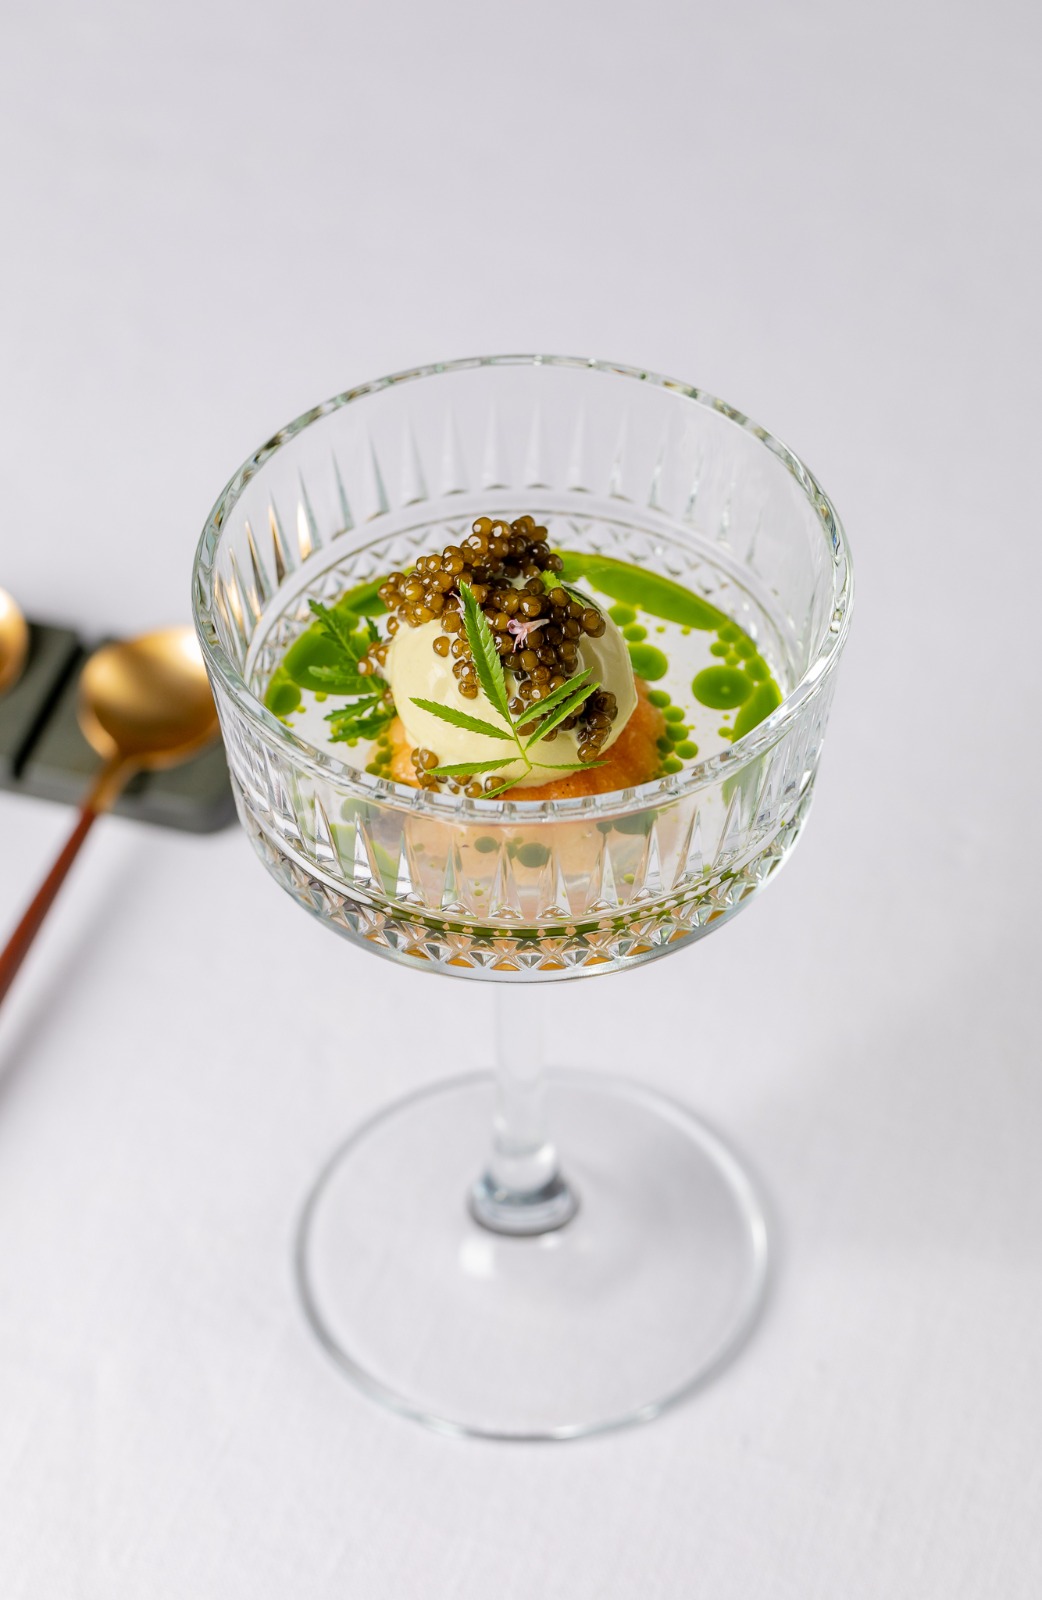 Best London restaurants | a delicate dish with drops of green oil is served inside an art deco style coupe glass at Da Terra